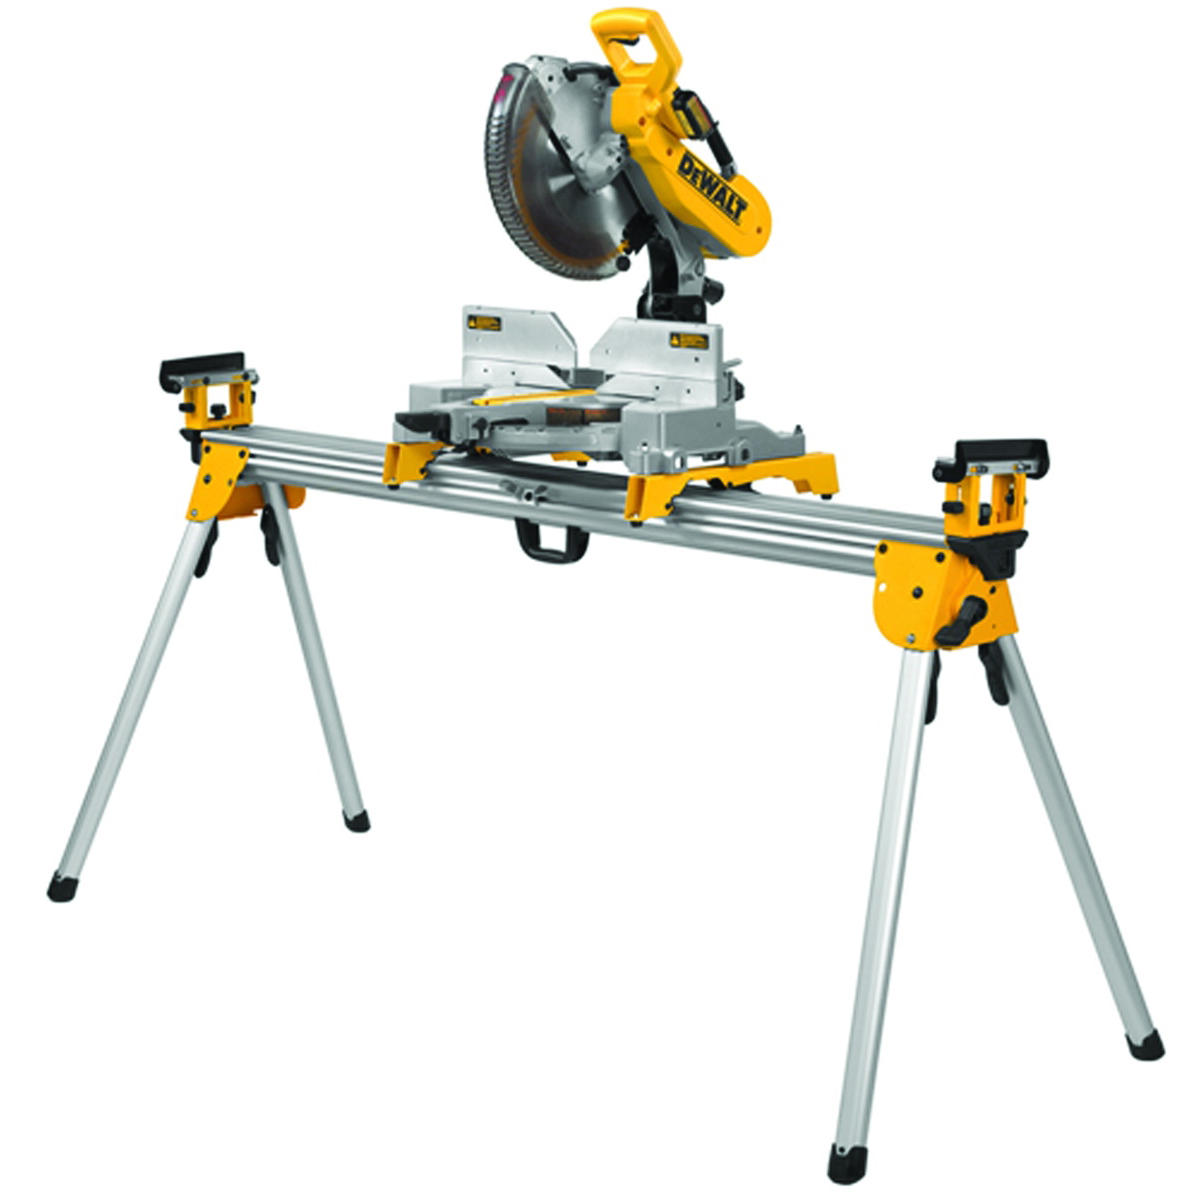 DeWALT DWX723 Miter Saw Stand, 500 lb, 151 in W Stand, 32 in H Stand, Aluminum, Black/Yellow - 5